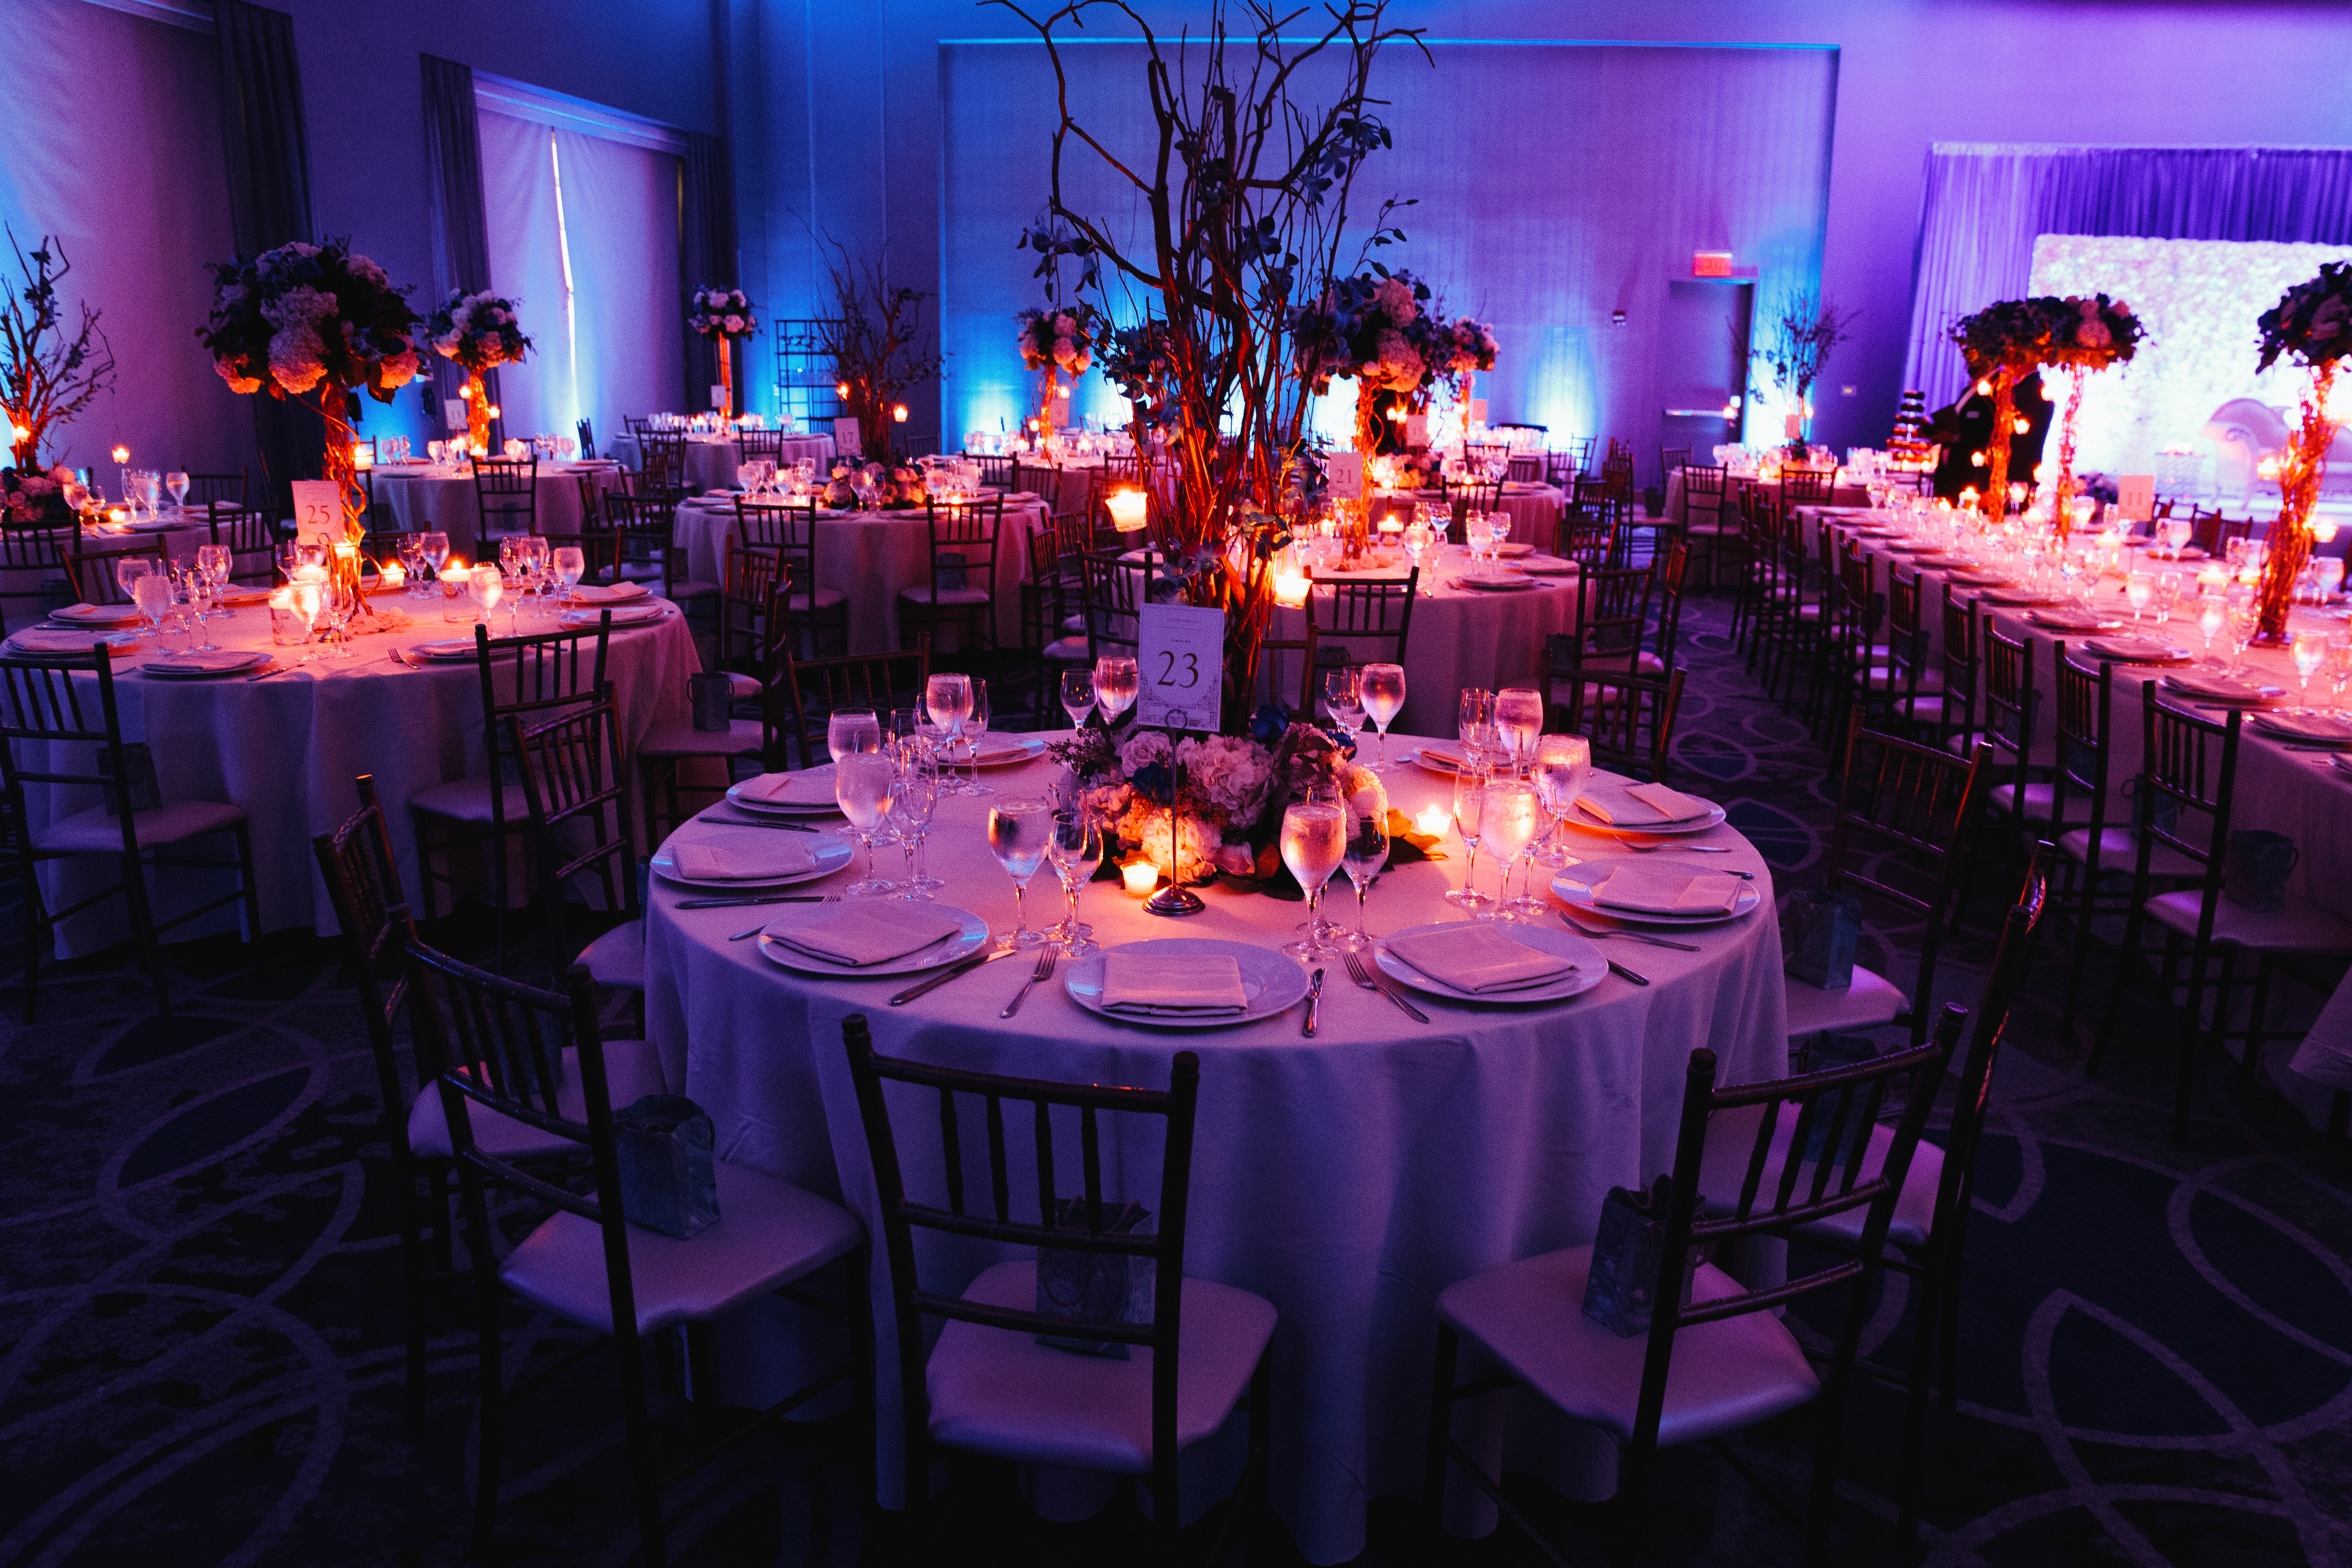 decorated-wedding-hall-with-candles-round-tables-centerpieces.jpg